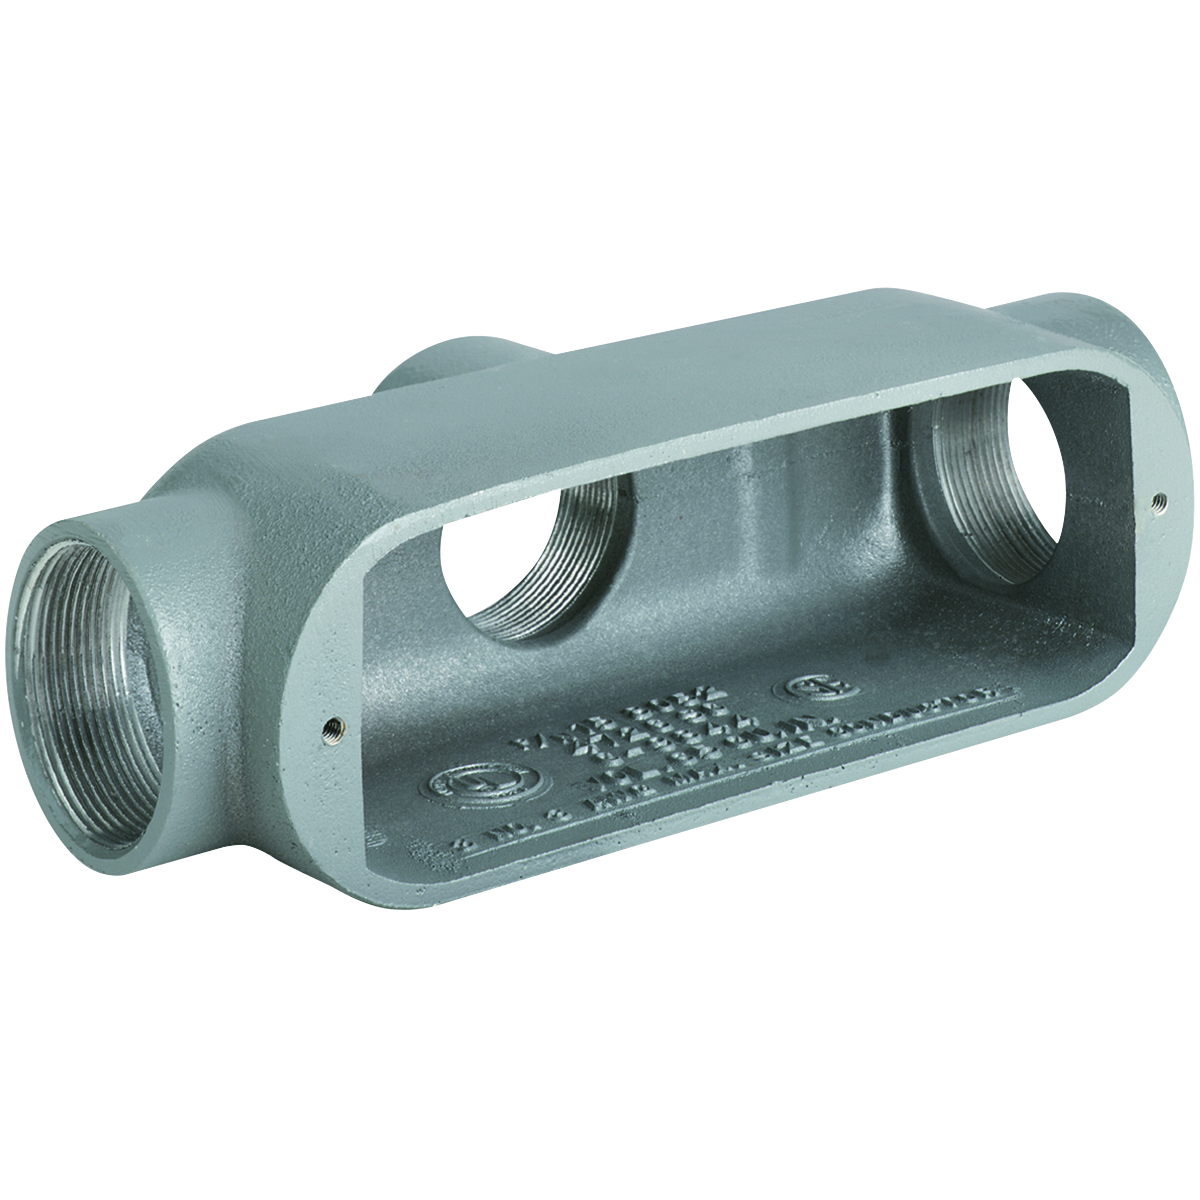 O SERIES/DURALOY 5 SERIES - ALUMINUM CONDUIT BODY - TB TYPE - HUB SIZE 1INCH - VOLUME 12.0 CUBIC INCHES